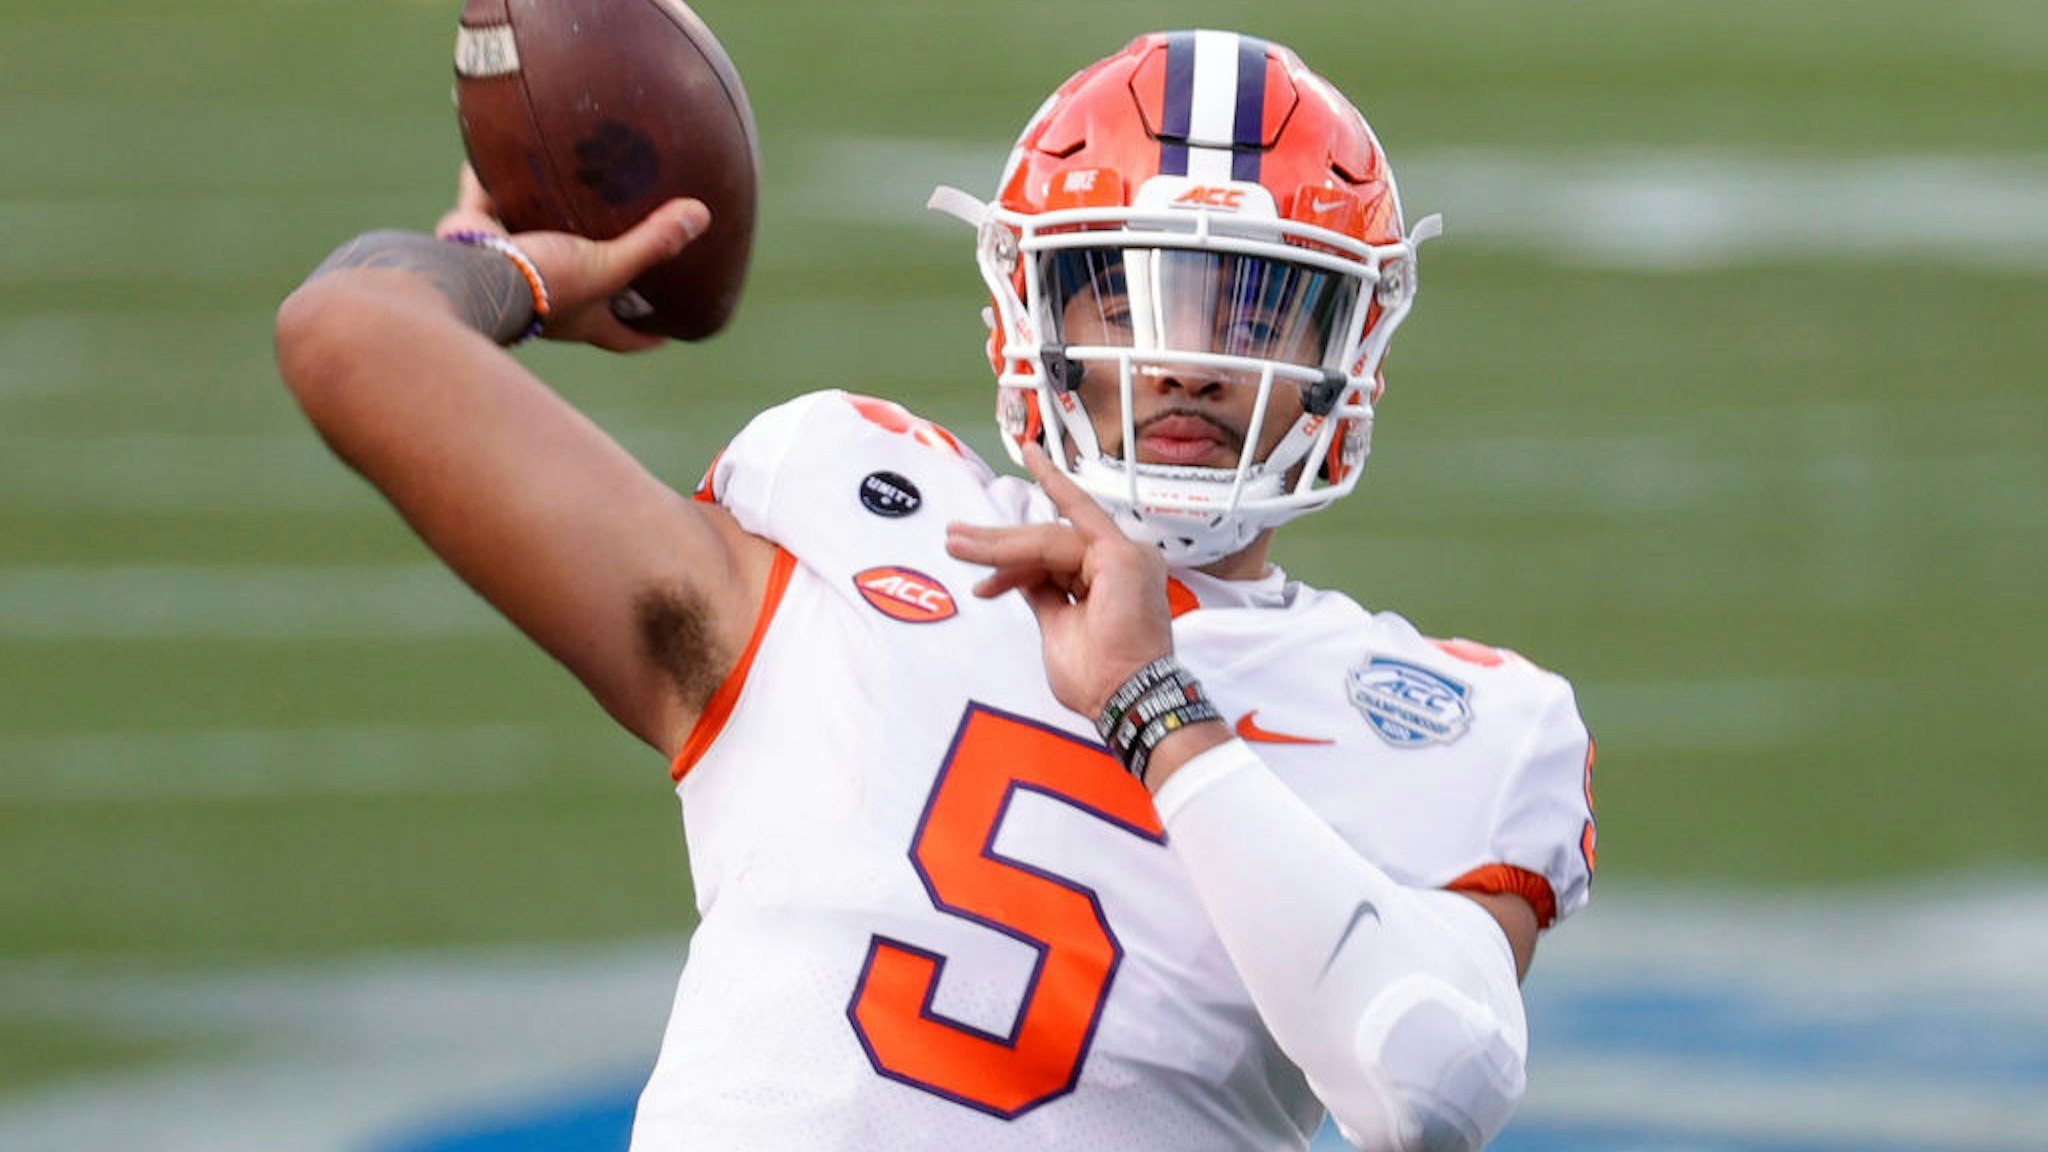 CHARLOTTE, NORTH CAROLINA - DECEMBER 19: Quarterback D.J. Uiagalelei #5 of the Clemson Tigers warms up before the ACC Championship game against the Notre Dame Fighting Irish at Bank of America Stadium on December 19, 2020 in Charlotte, North Carolina. (Photo by Jared C. Tilton/Getty Images)